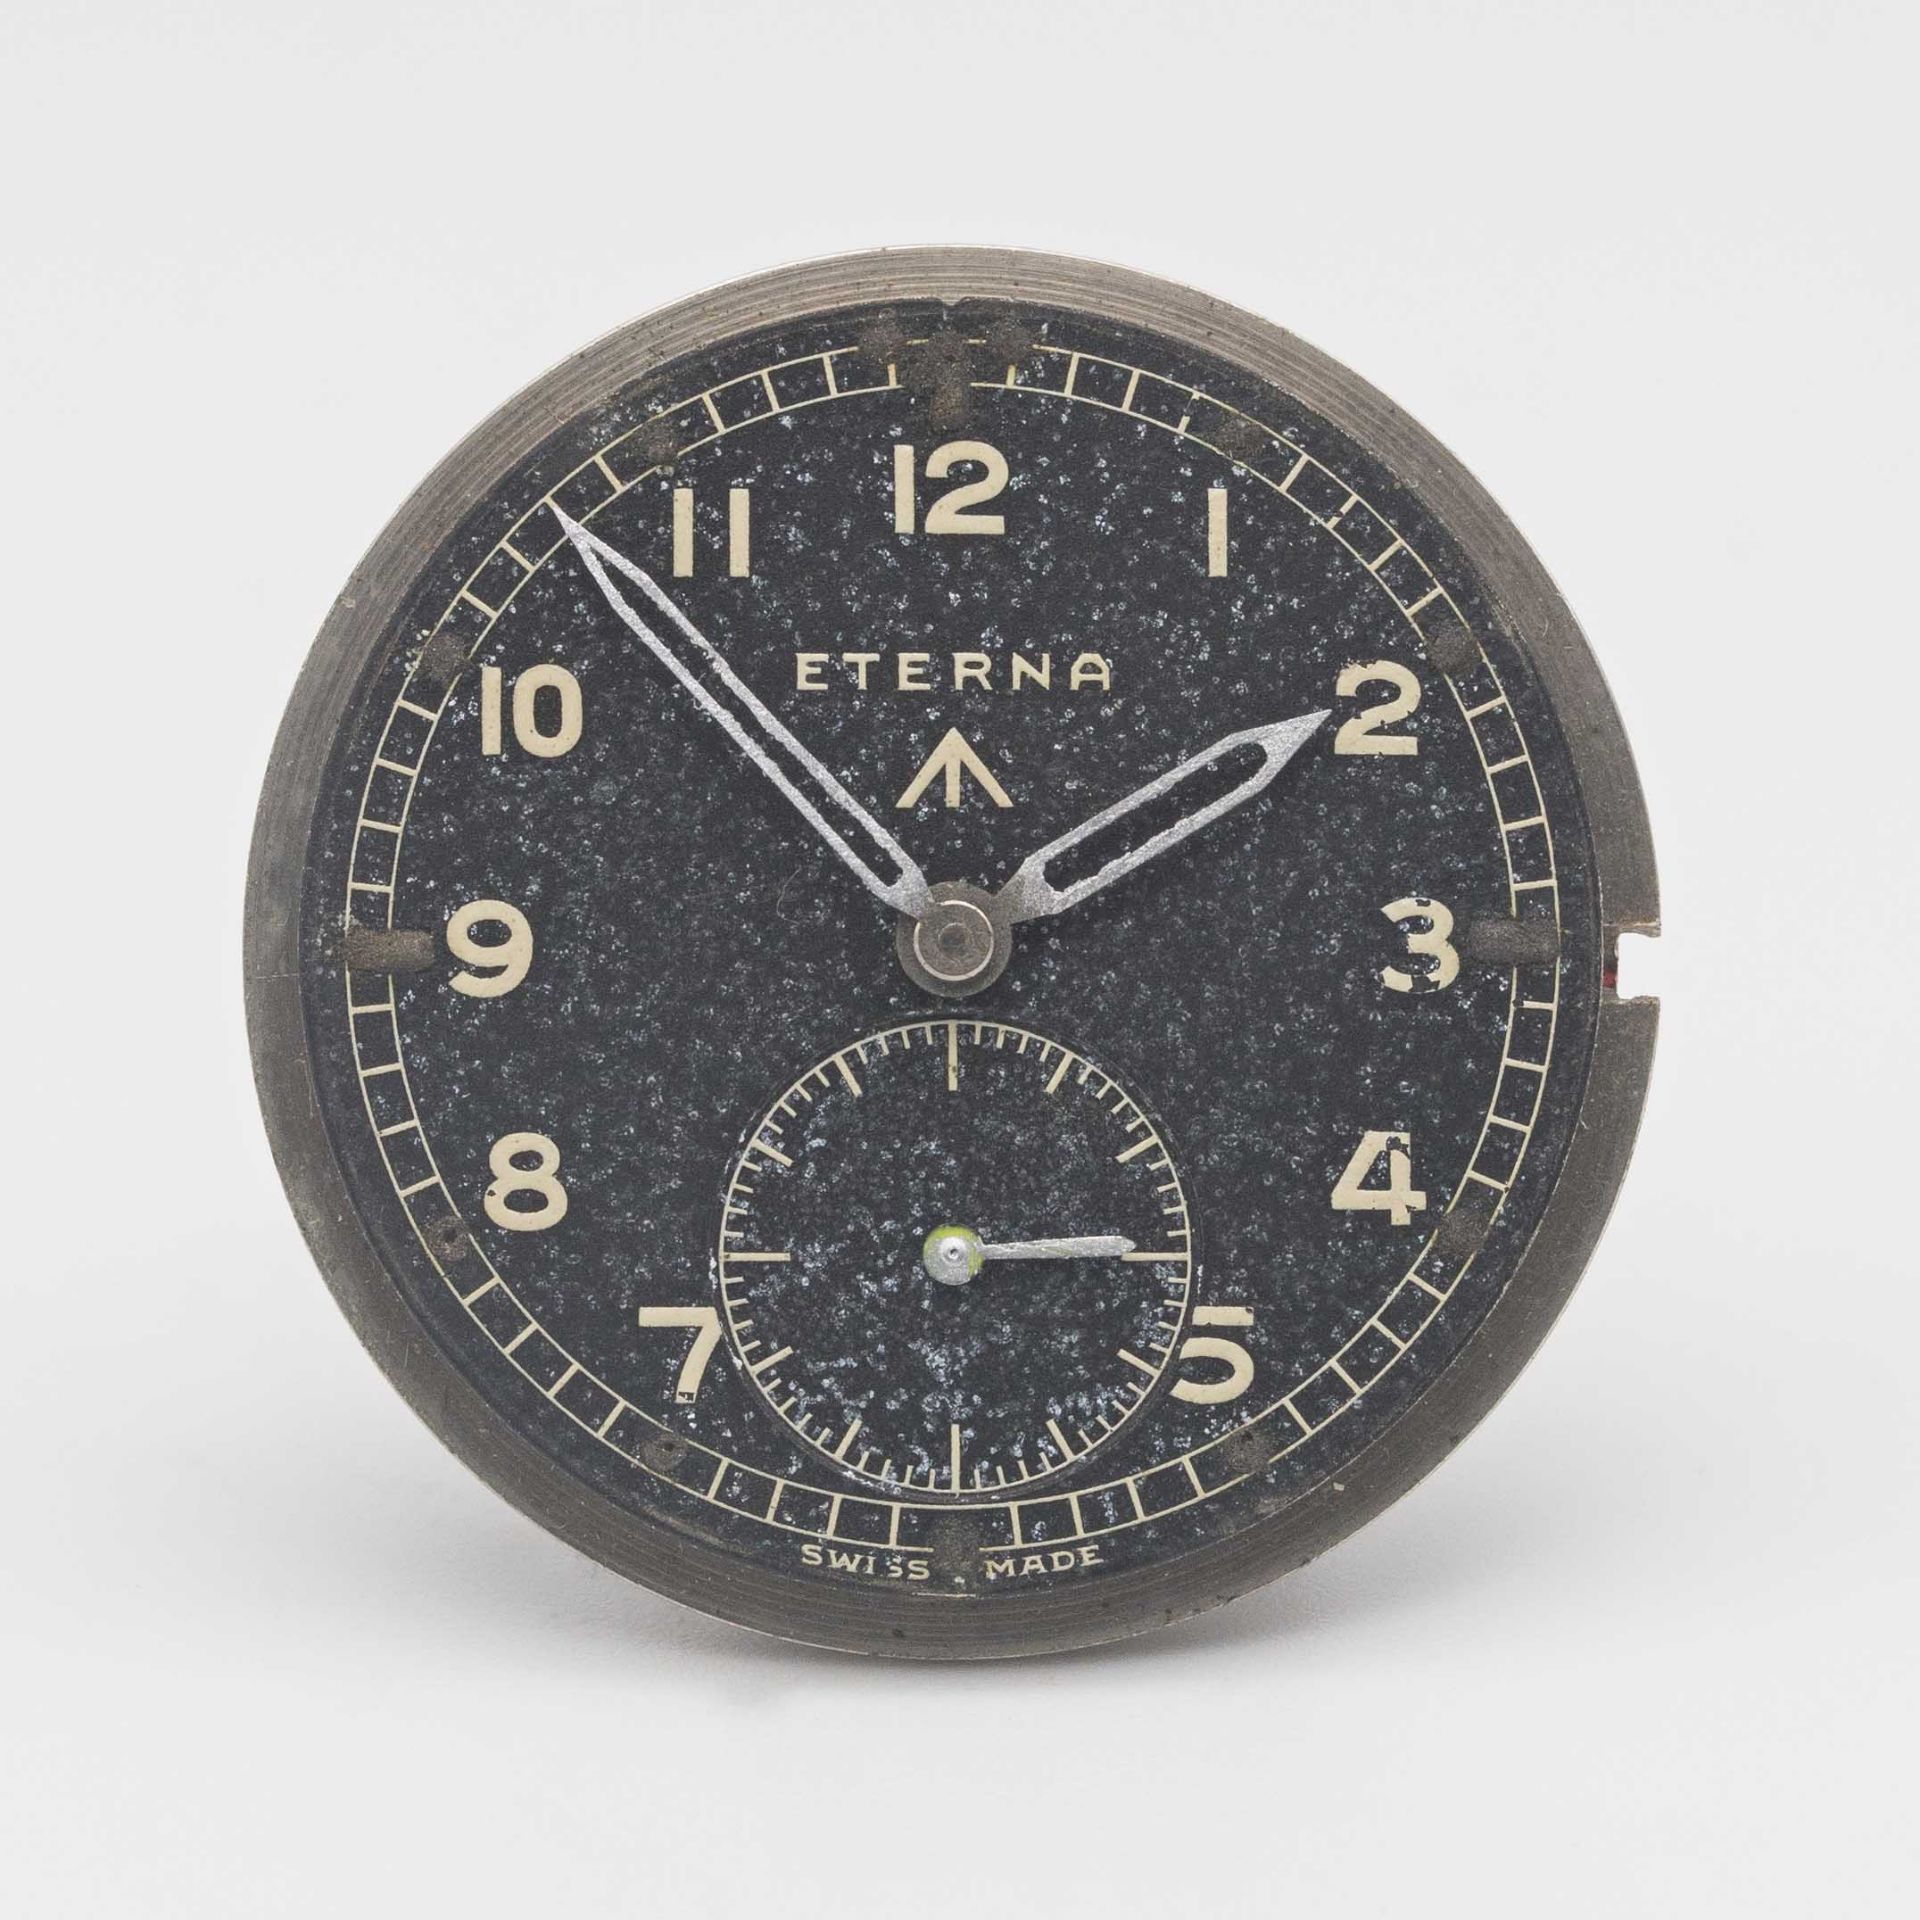 A GENTLEMAN'S STAINLESS STEEL BRITISH MILITARY ETERNA W.W.W. WRIST WATCH CIRCA 1940s, PART OF THE " - Image 7 of 10